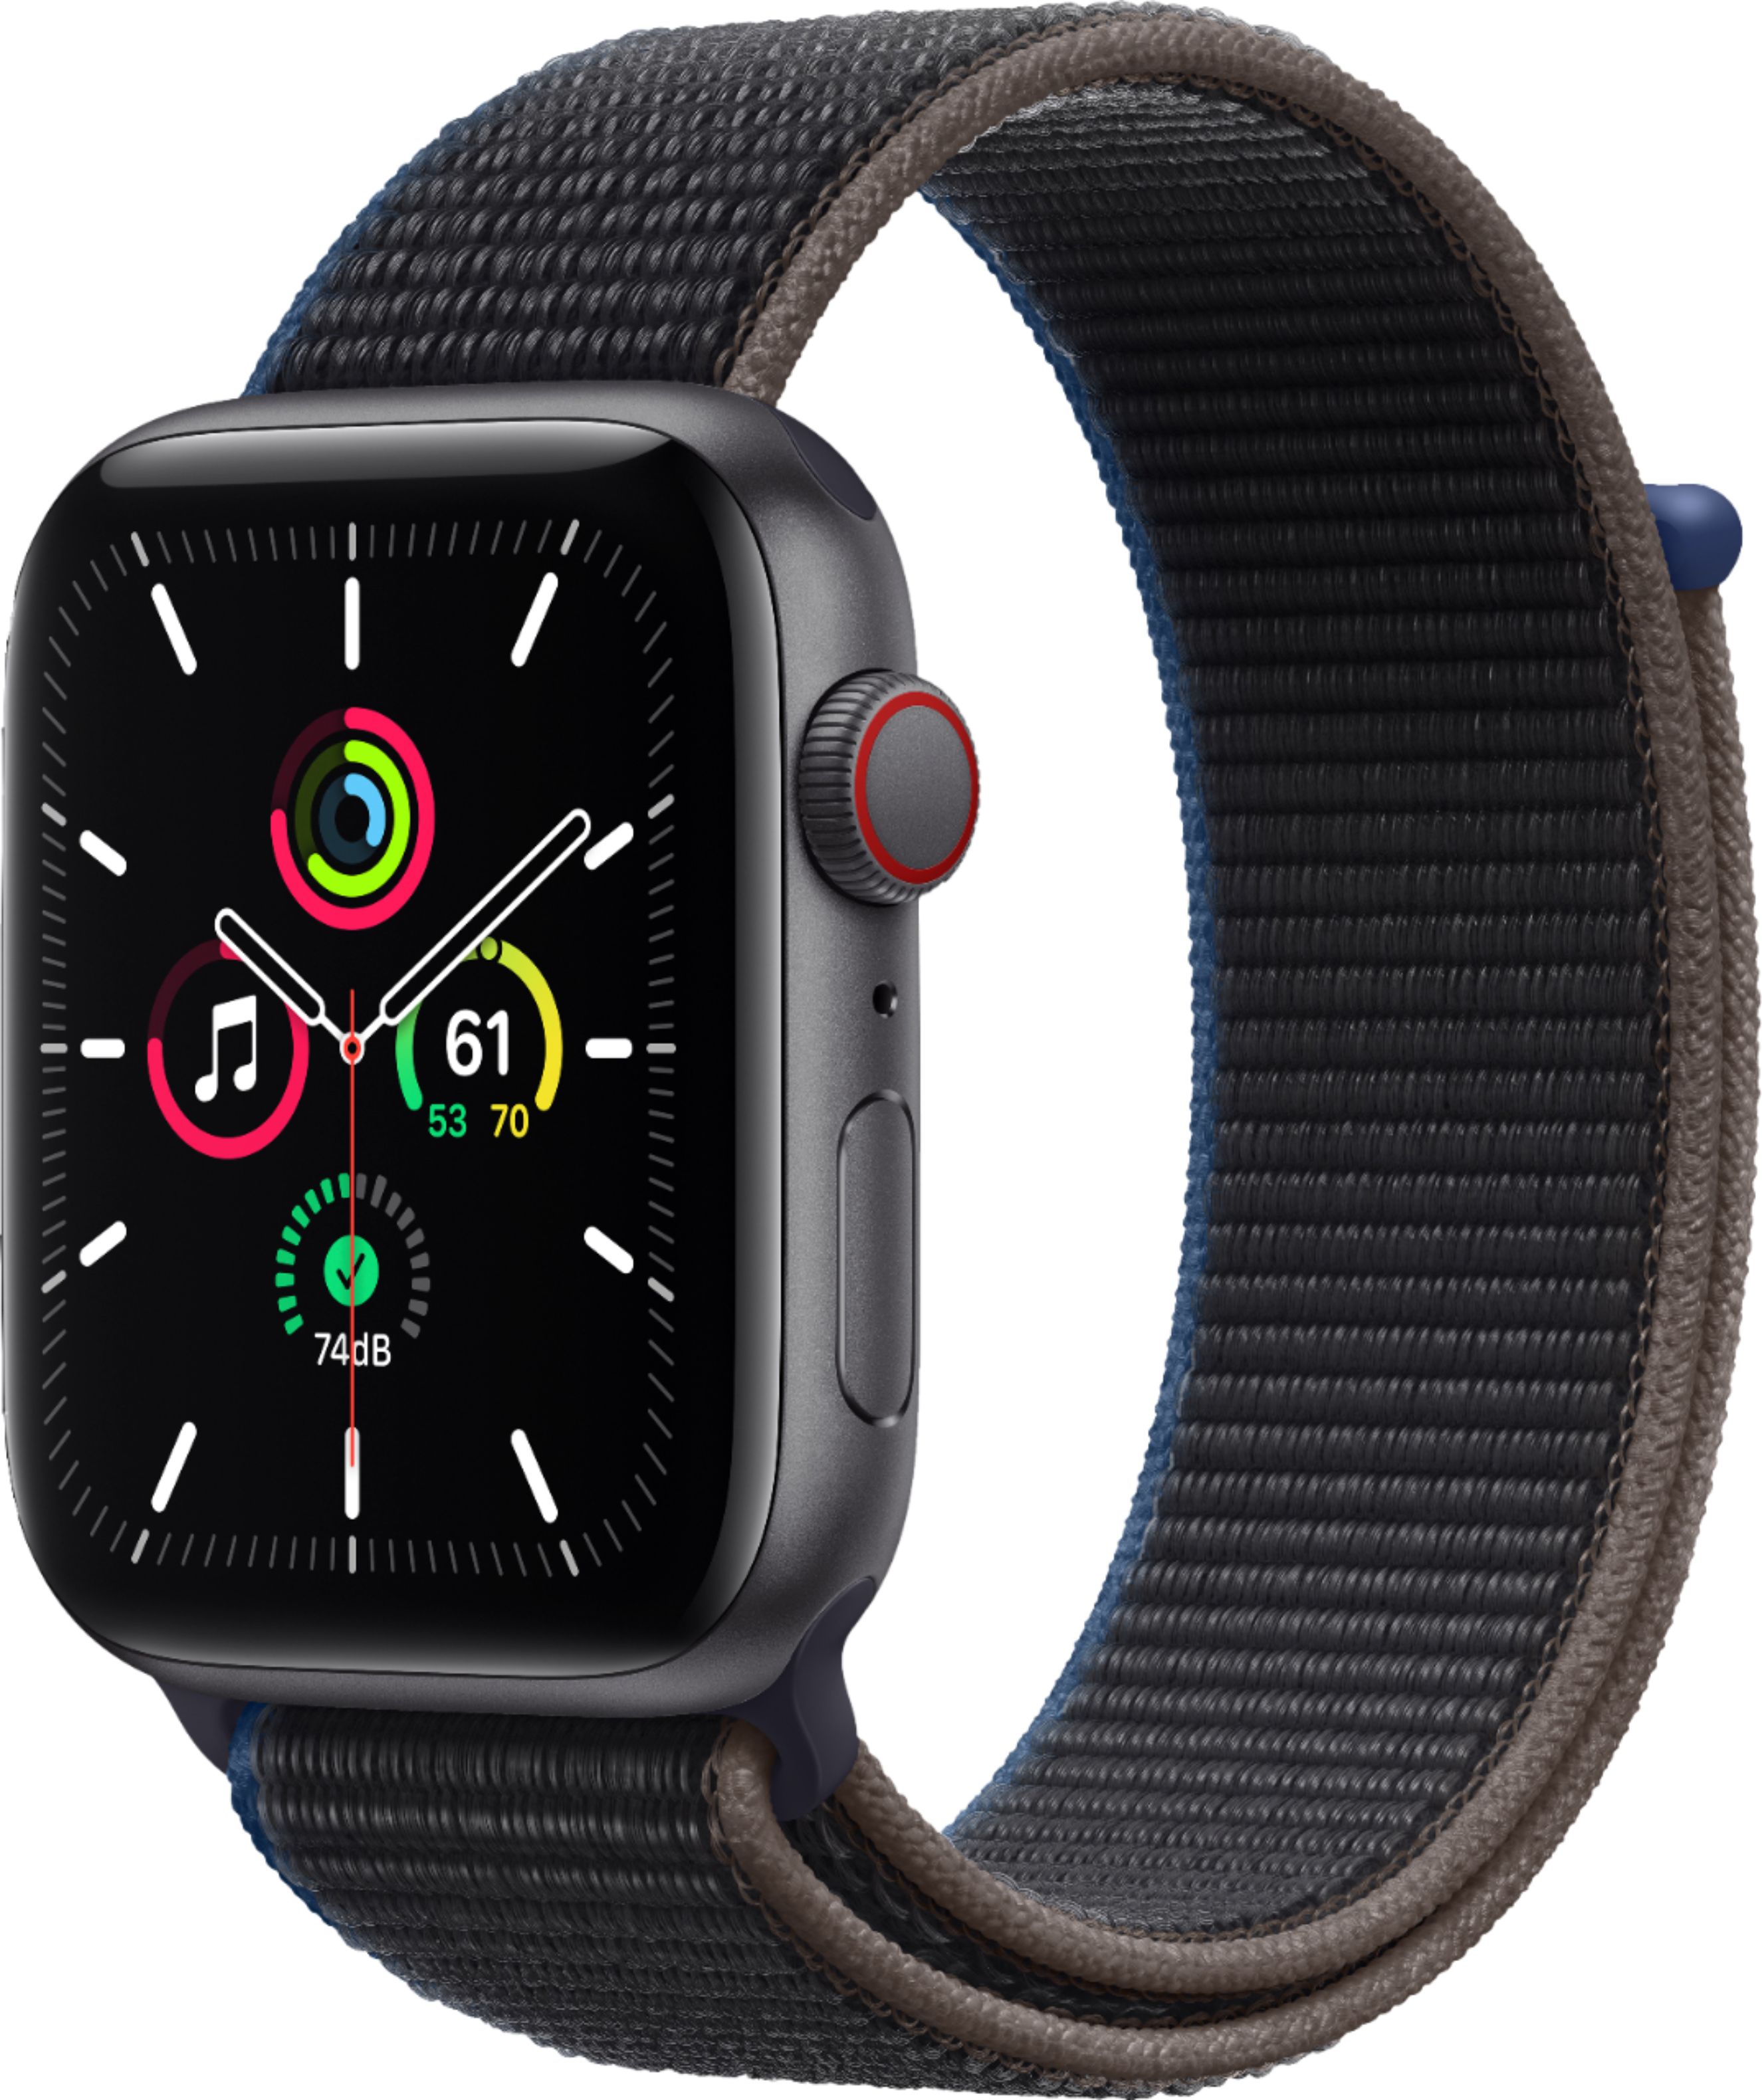 Apple Watch SE (GPS + Cellular) 44mm Aluminum Case with Charcoal Sport Loop - Space Gray